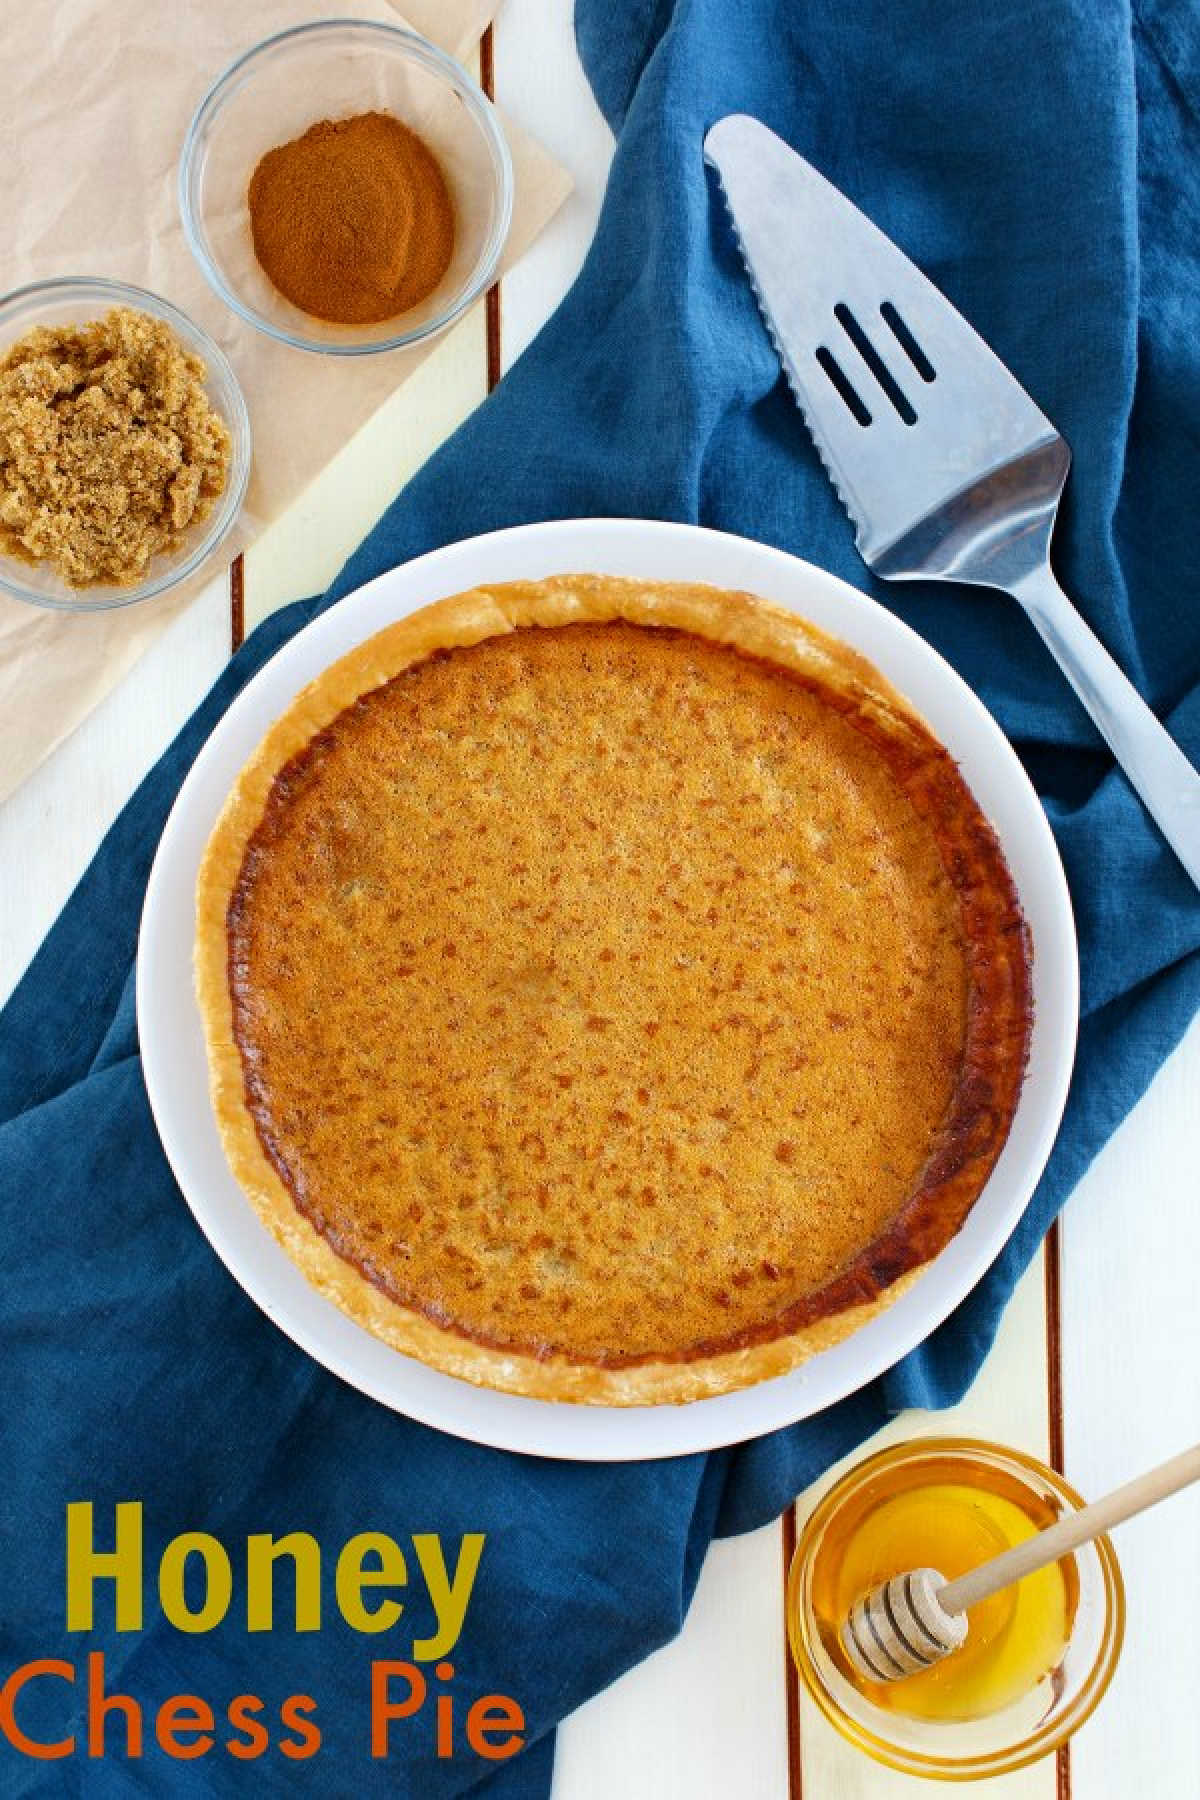 Enjoy this honey sweetened twist on a classic southern chess pie. With a kiss of lemon, honey richness and lots of chess pie goodness, it is a perfect treat for almost any occasion!